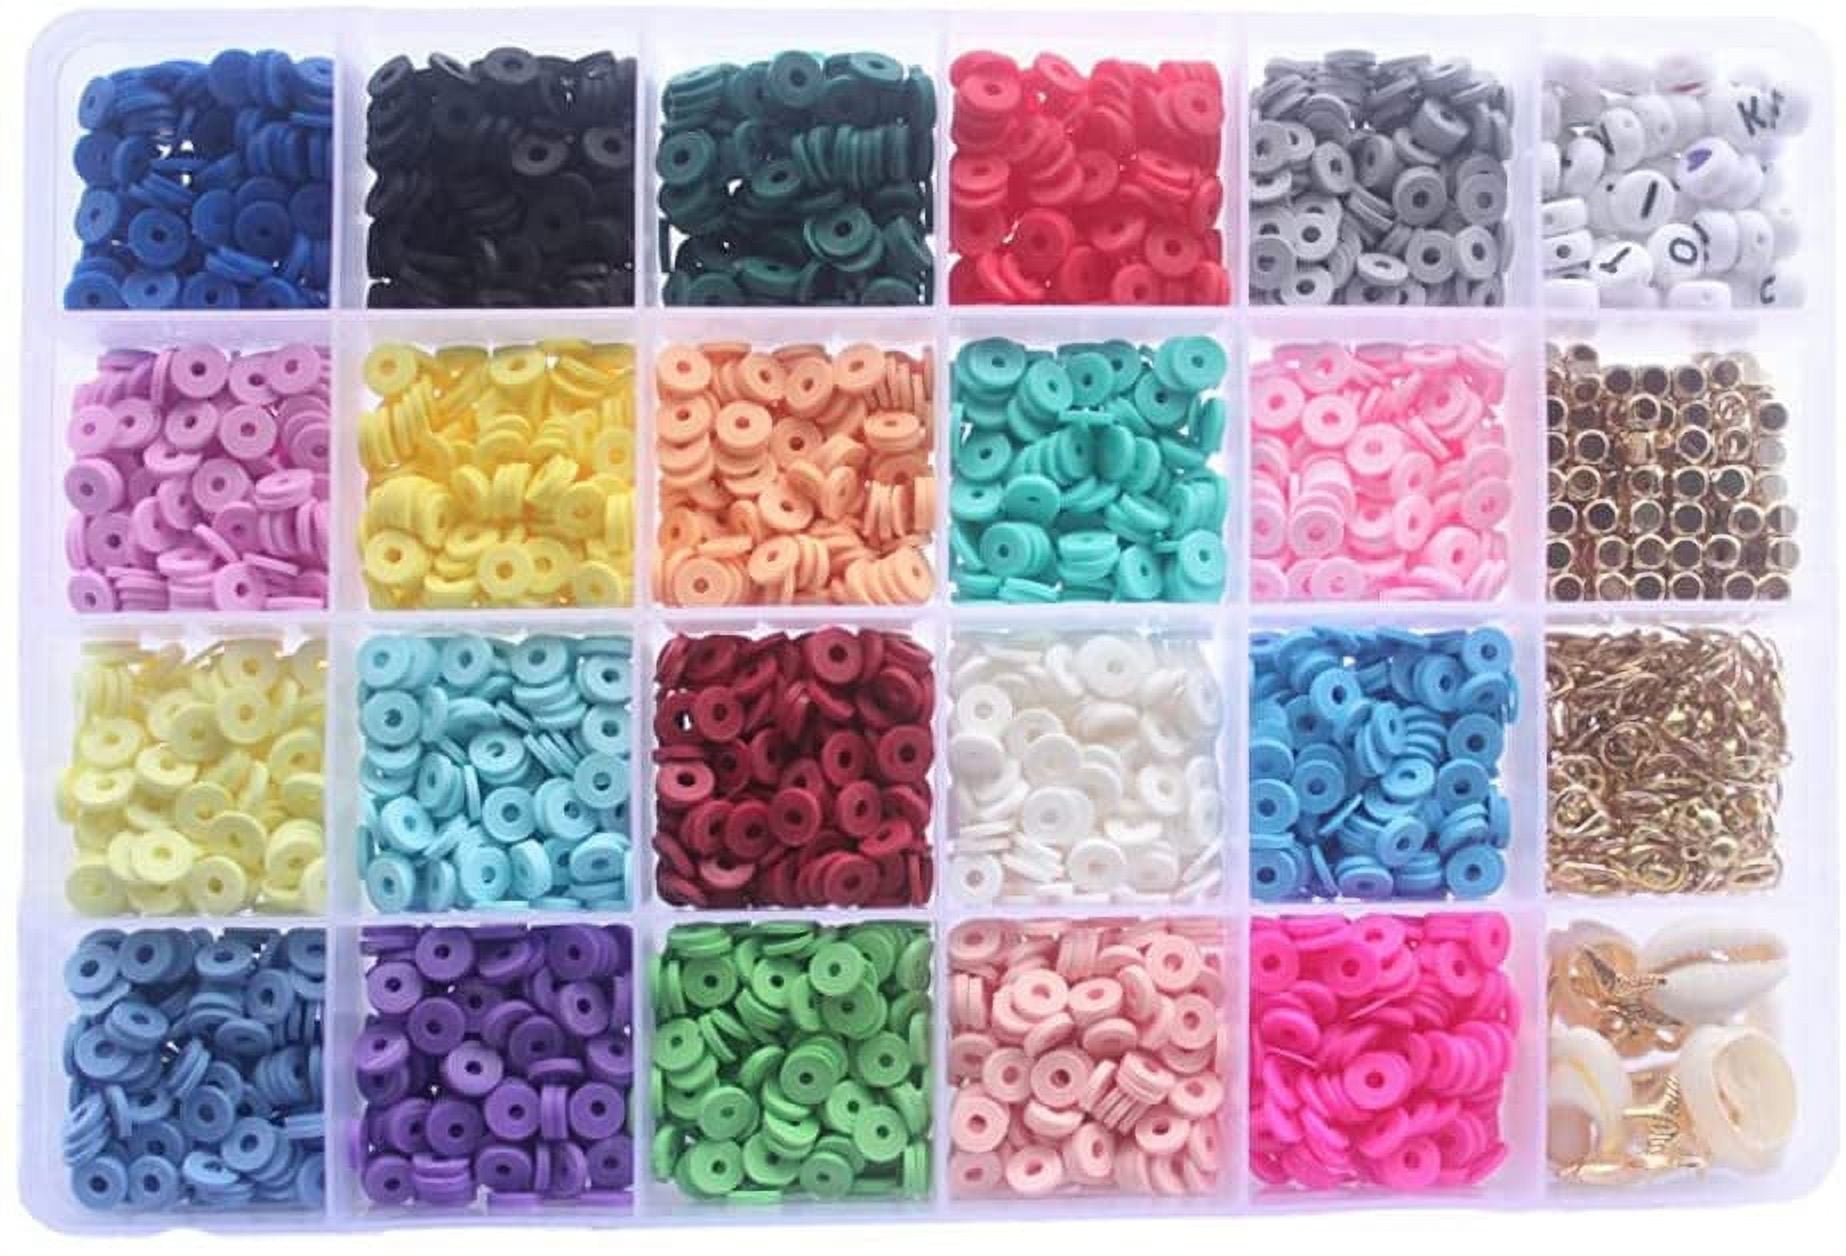 DICOBD Craft Beads Kit 10800pcs 3mm Glass Seed Beads and 1200pcs Letter Beads  for Friendship Bracelets Jewelry Making Necklaces and Key Chains with 2  Rolls of Cord 